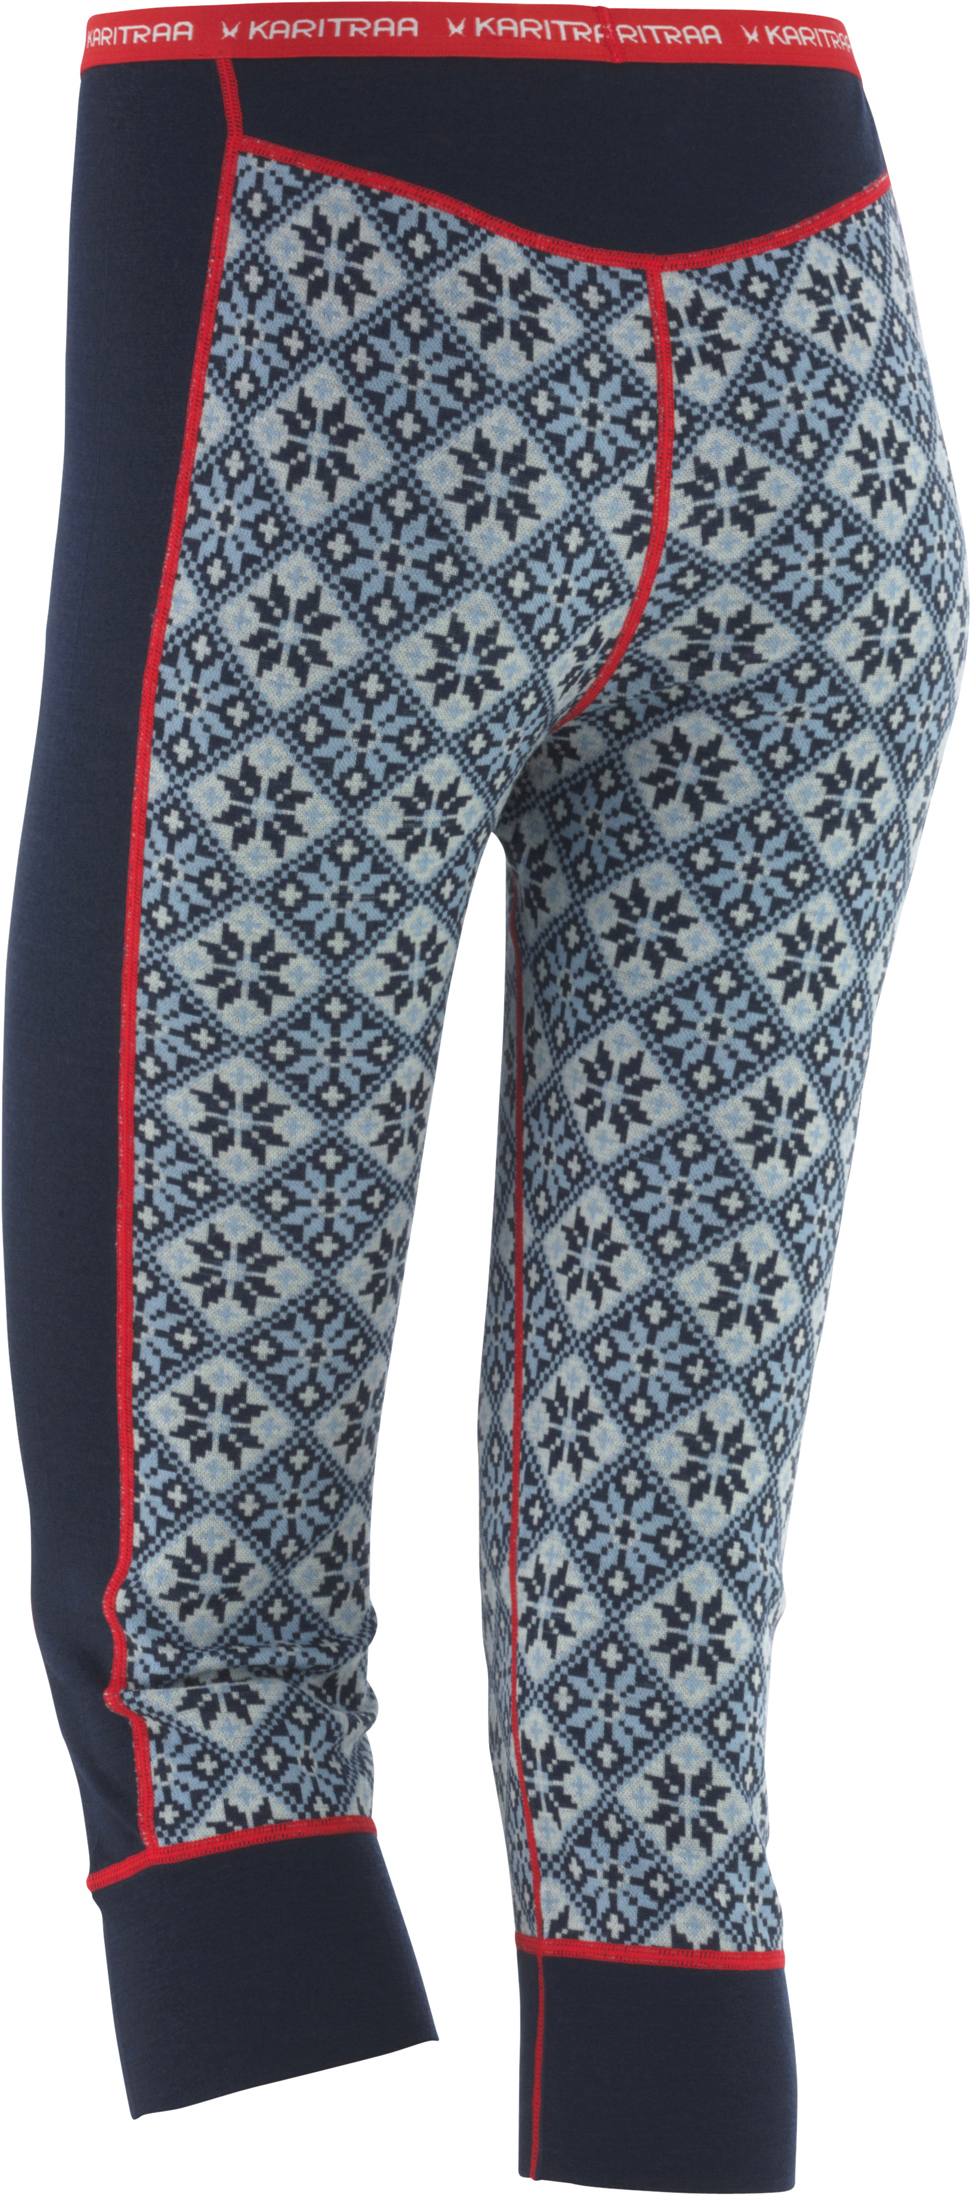 Women's functional 3/4 tights